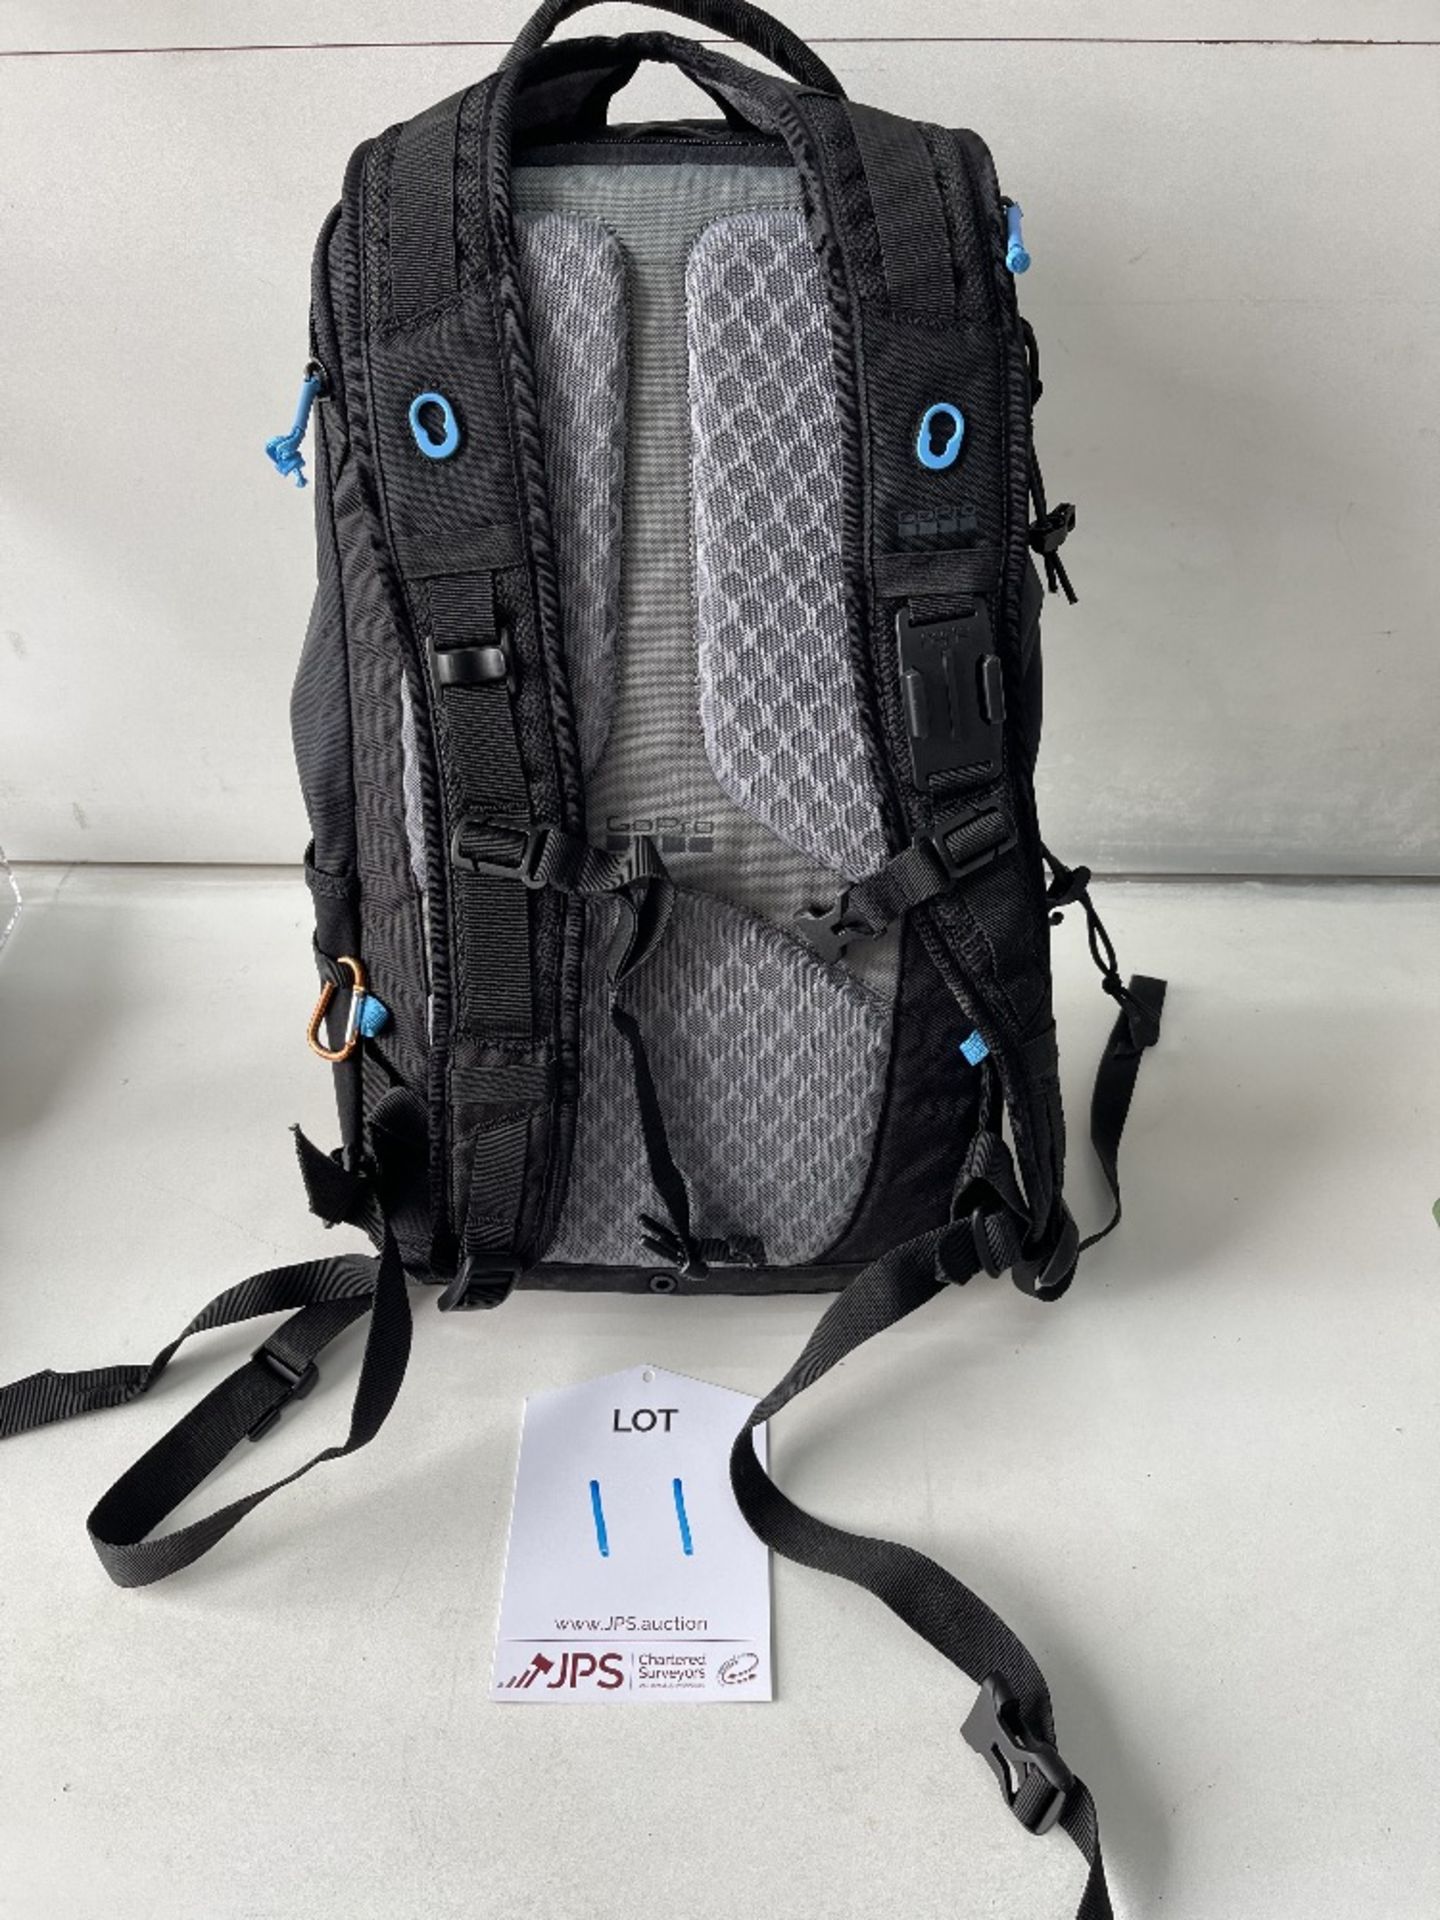 Go Pro backpack - Image 3 of 5